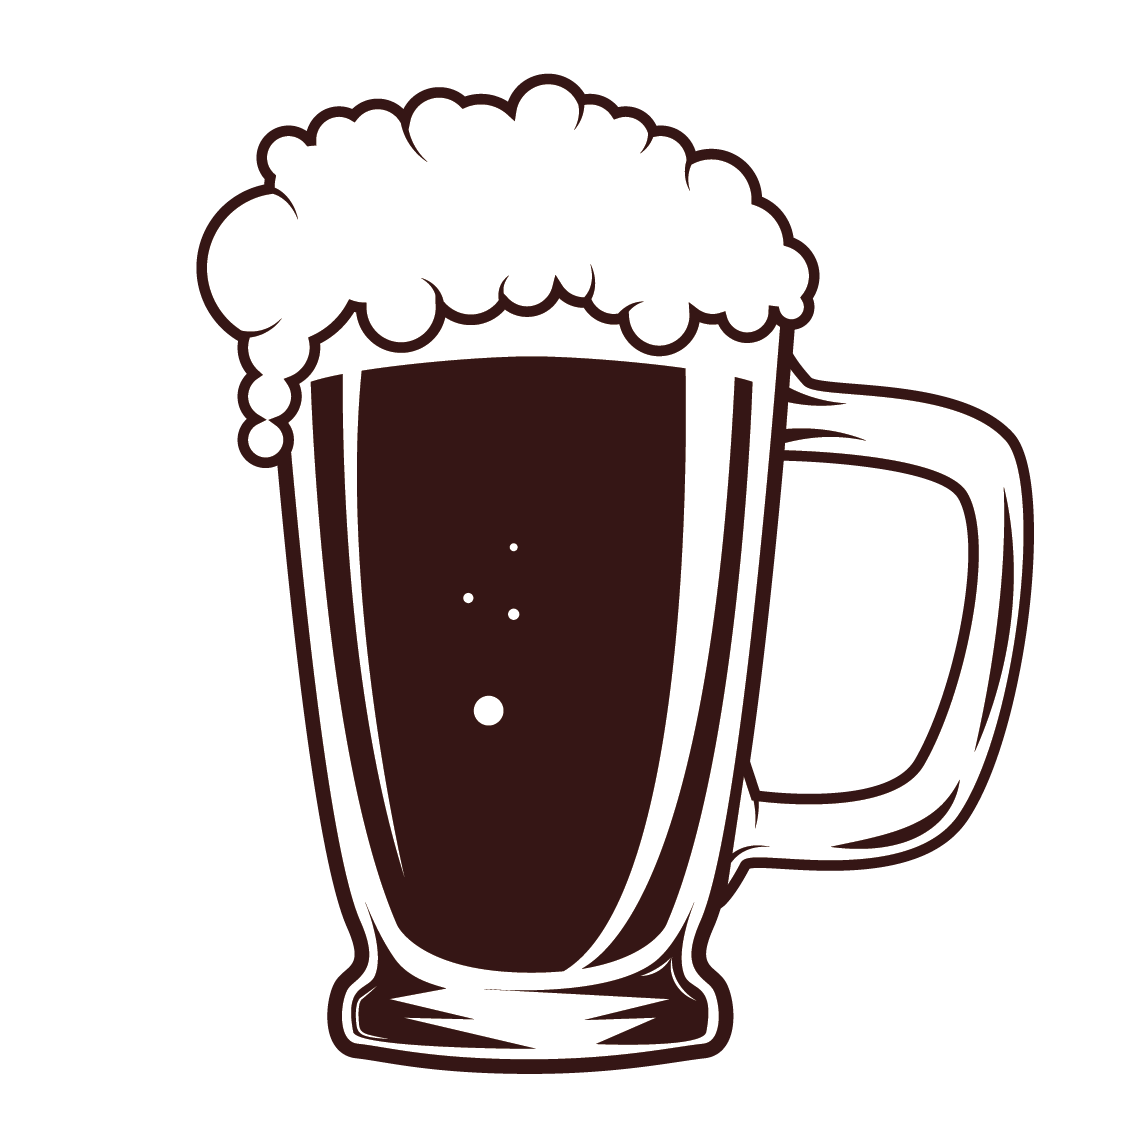 Mug Beer Vector Coffee Cup HD Image Free PNG Clipart